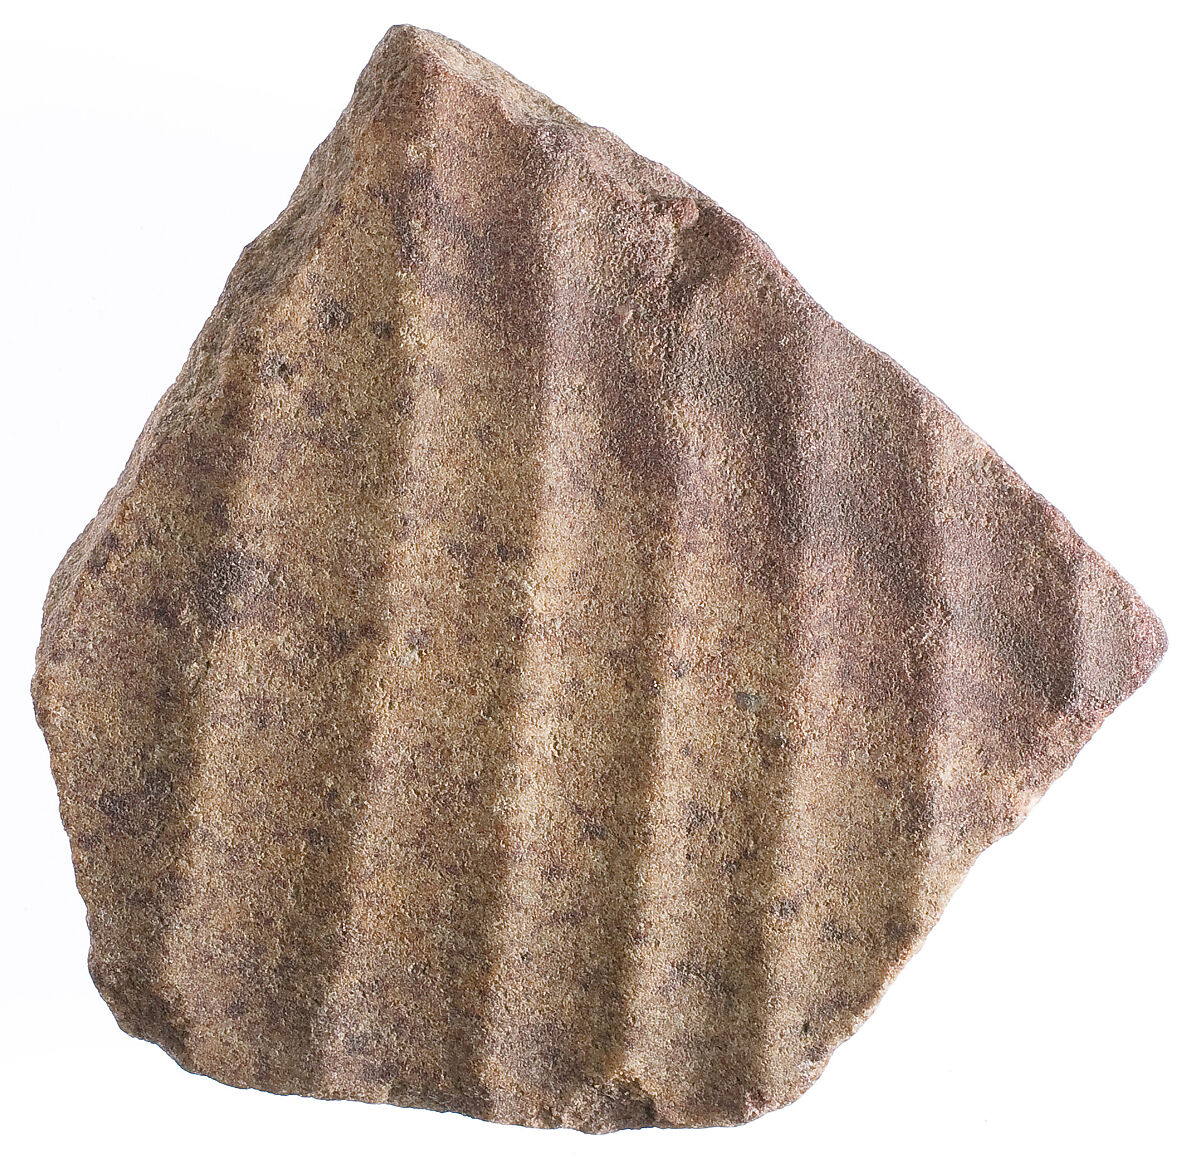 body fragment with garment pleats, Red quartzite 